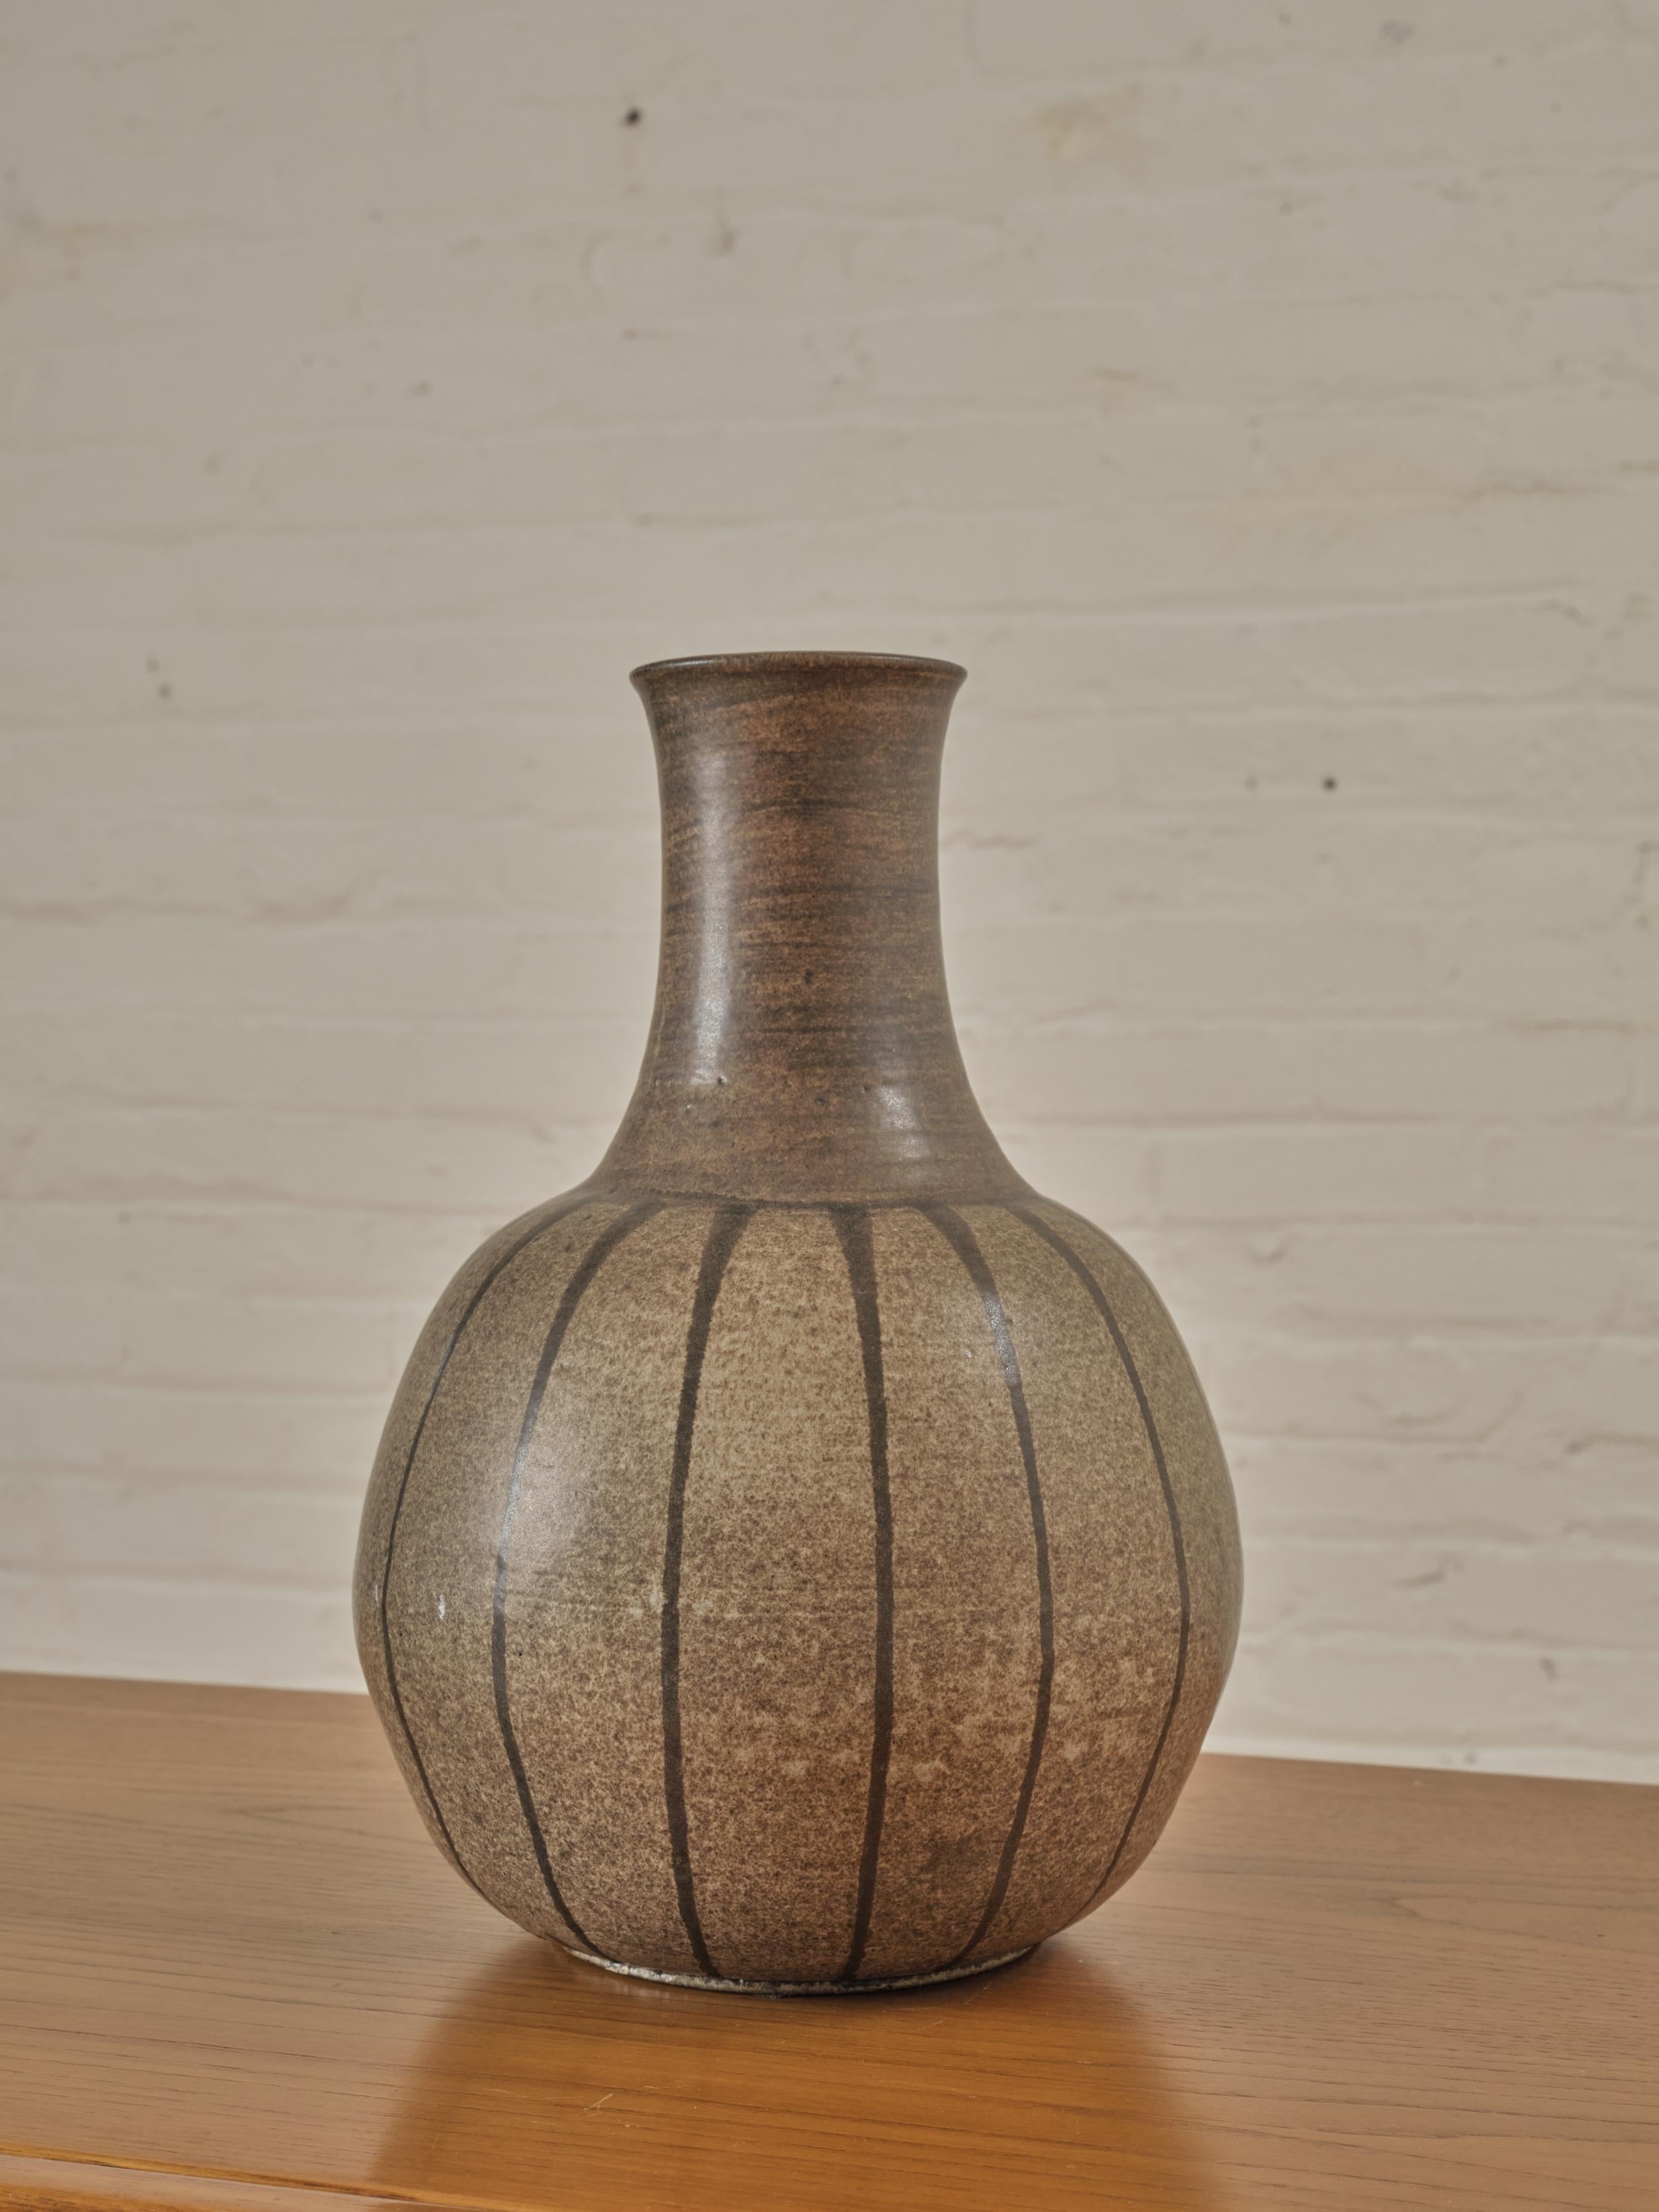 Ceramic Vase with by Phyl Lynch with stripe details and variations of brown. Sign engraved on the bottom.

